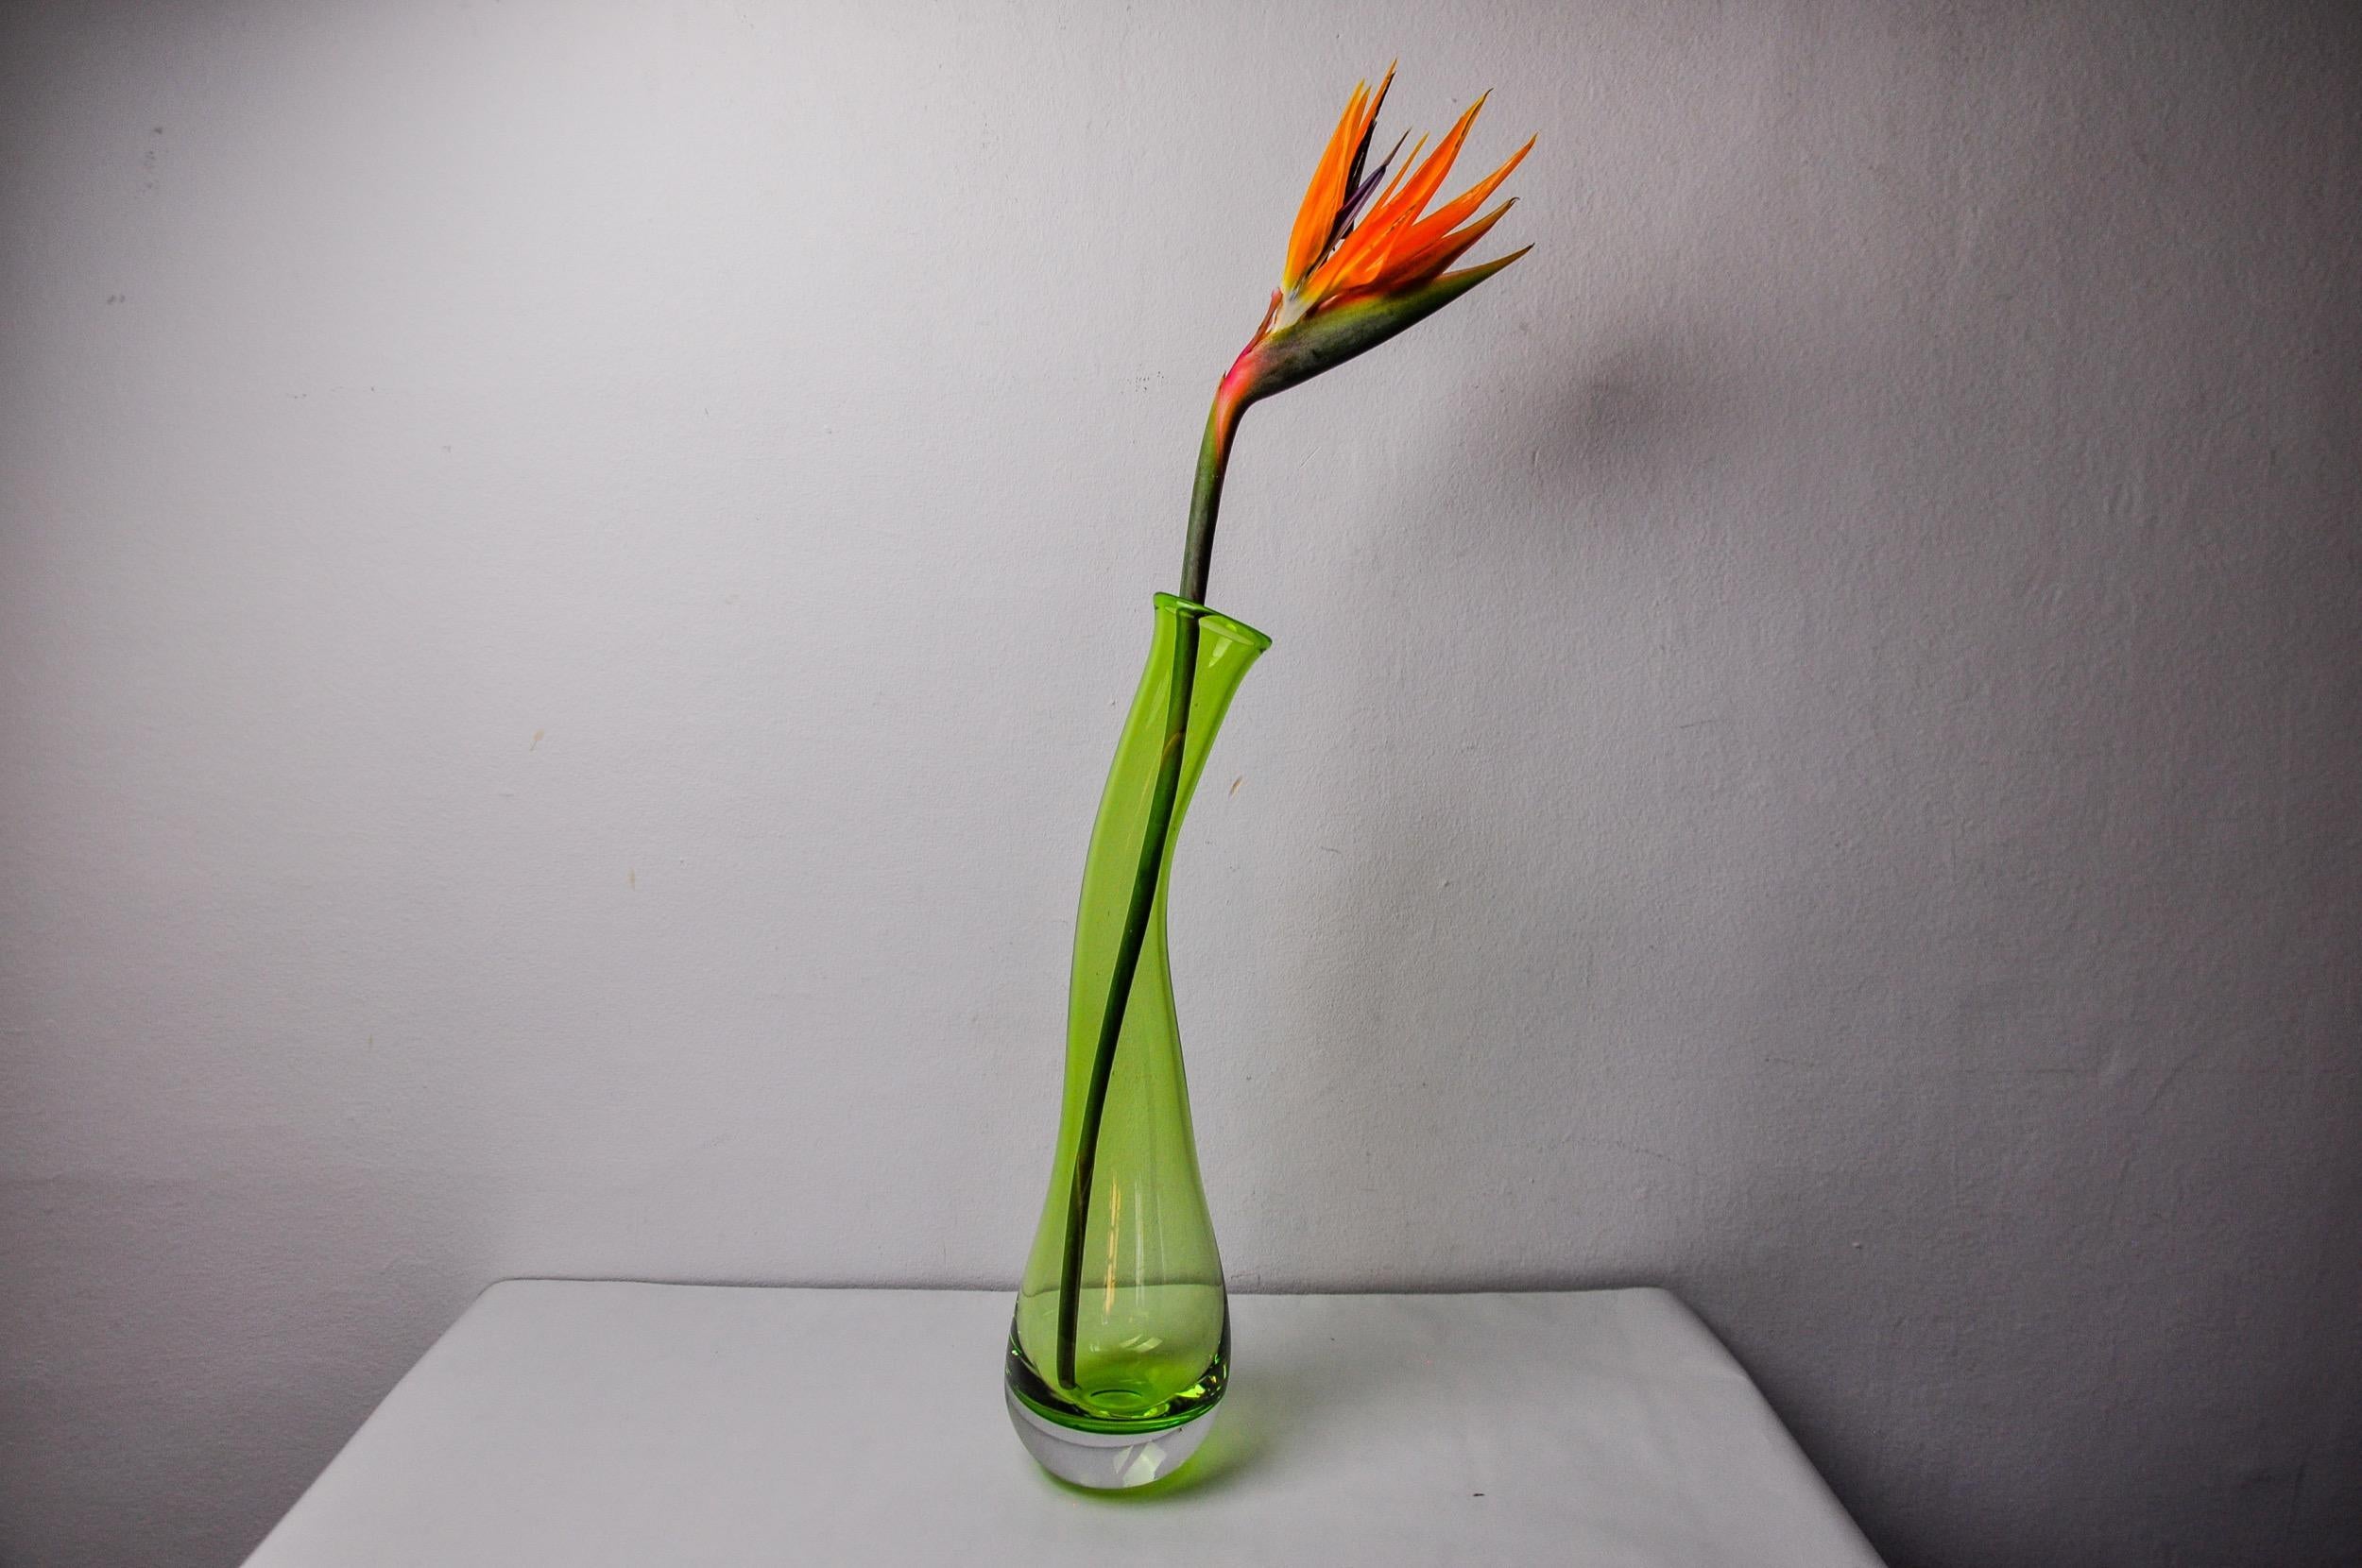 Superb and imposing green Sommerso vase designed and produced by Flavio Poli for Seguso in Italy in the 1970s. Murano glass vase handcrafted by Venetian master glassmakers using the Sommerso technique (superposition of layers of molten glass). Rare